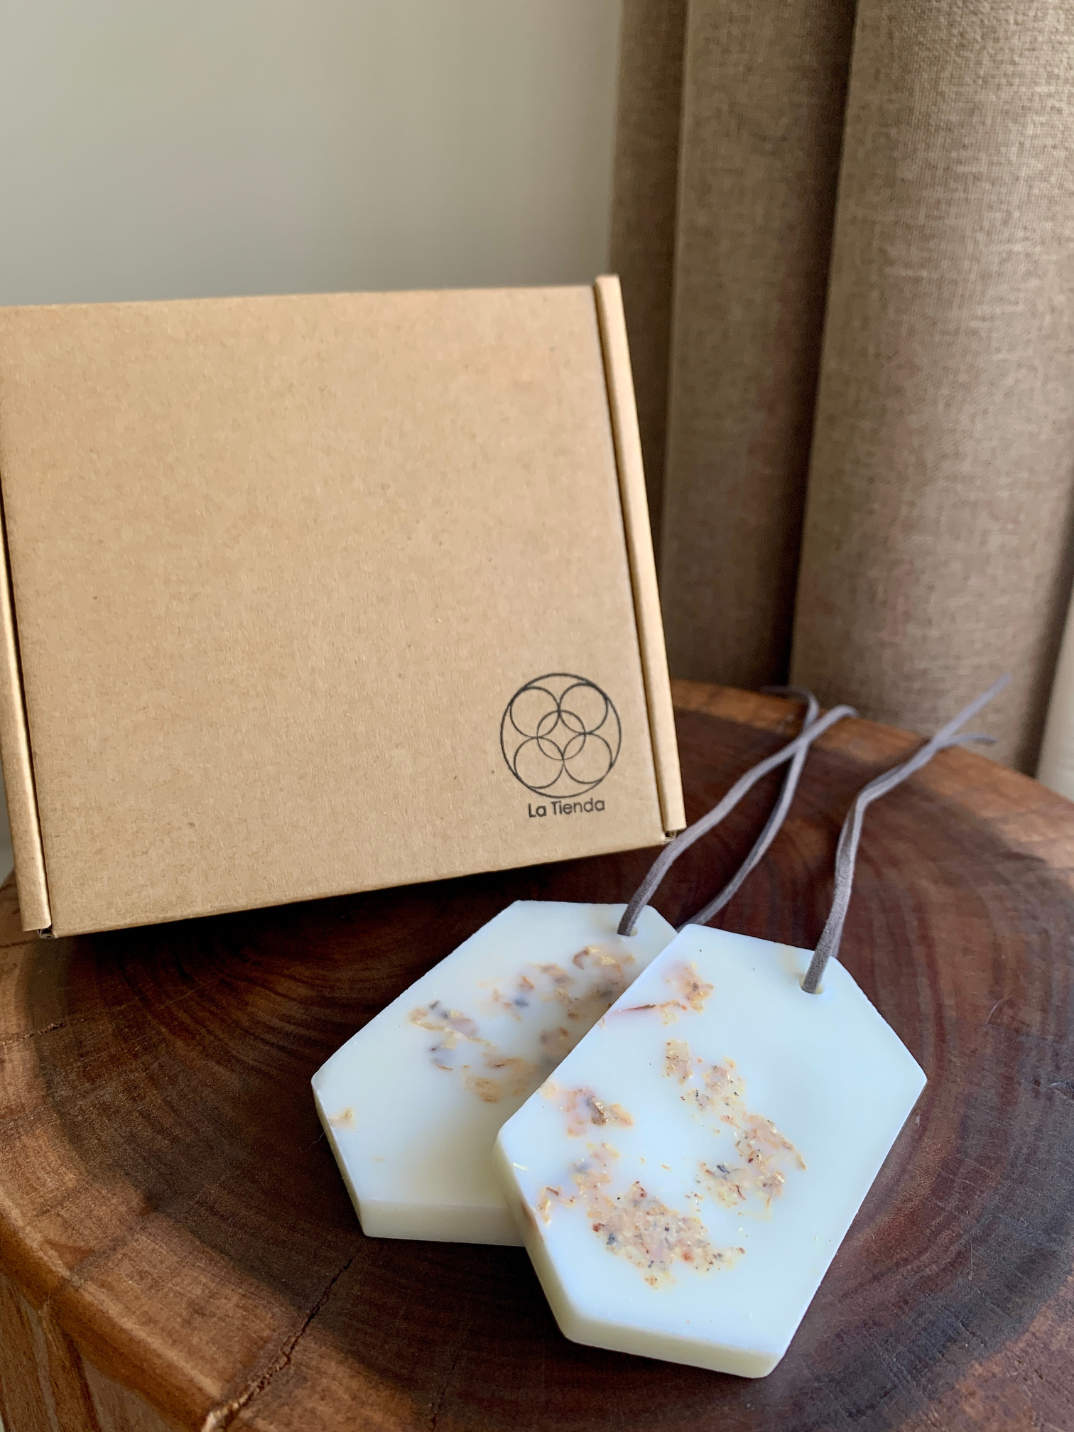 These palo santo wax sachets help repel pests and eliminate odour from your closets, cabinets and drawers.